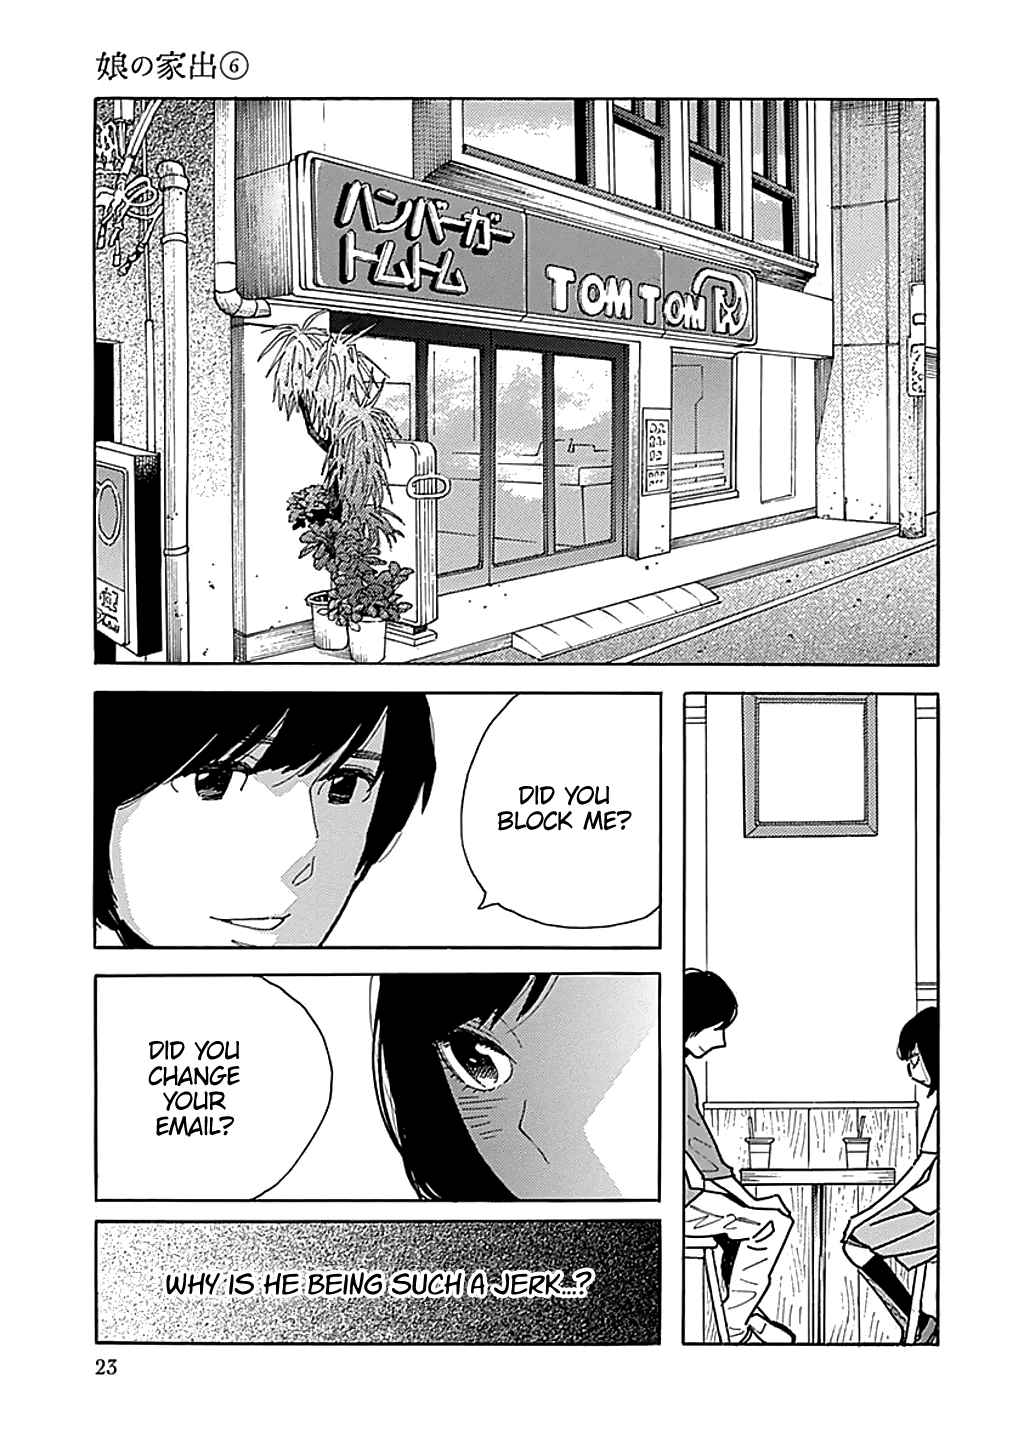 Musume no Iede Vol. 6 Ch. 31 Listening to Olivia